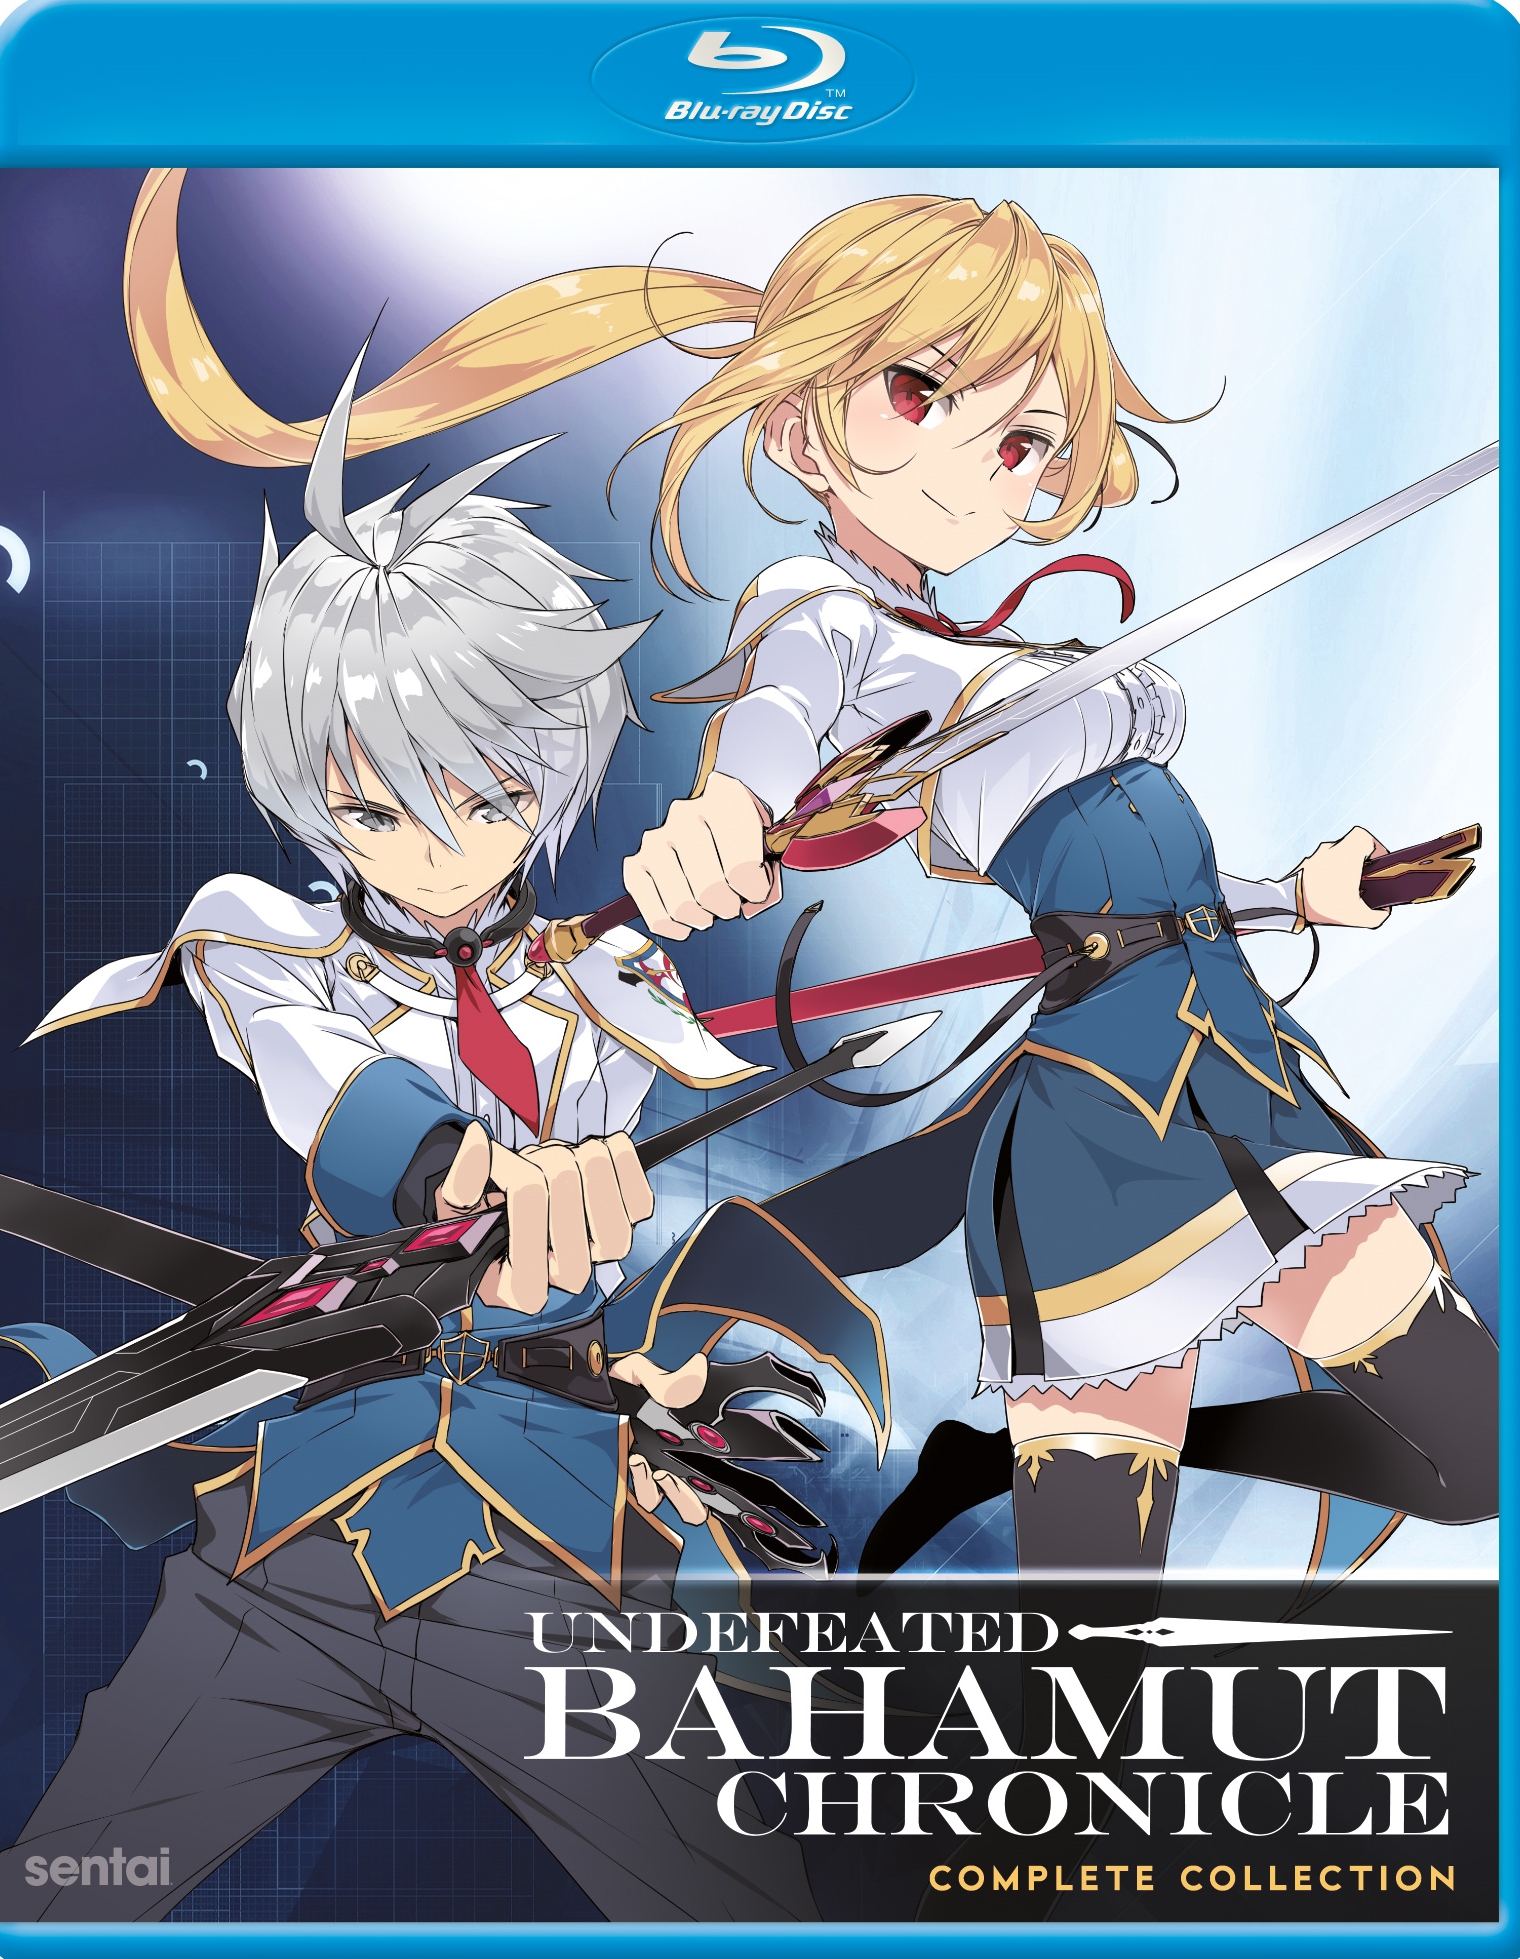 Undefeated Bahamut Chronicle: Complete Collection [Blu-ray]